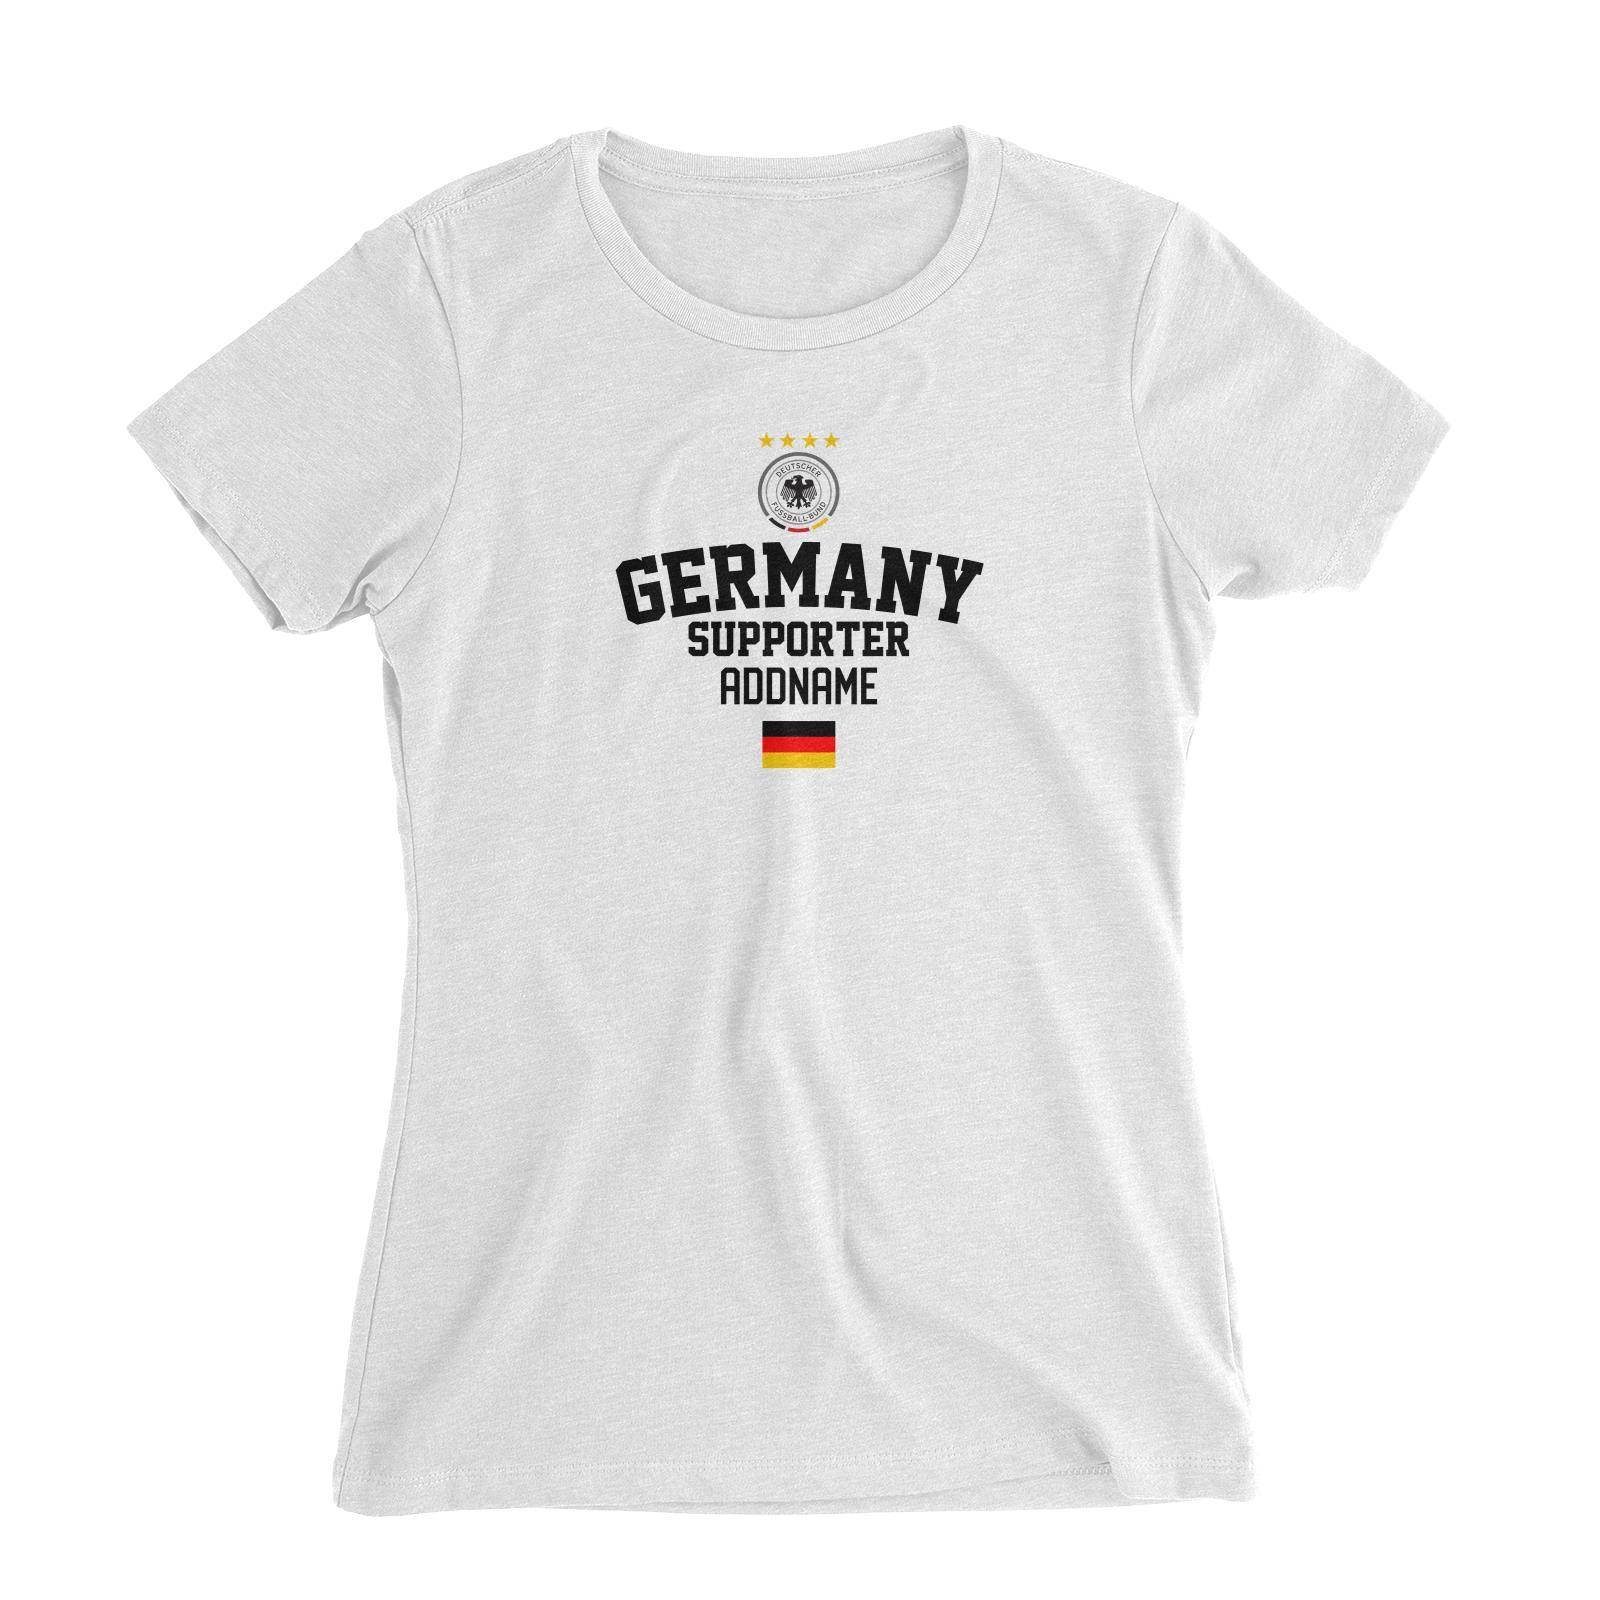 Germany Supporter World Cup Addname Women's Slim Fit T-Shirt